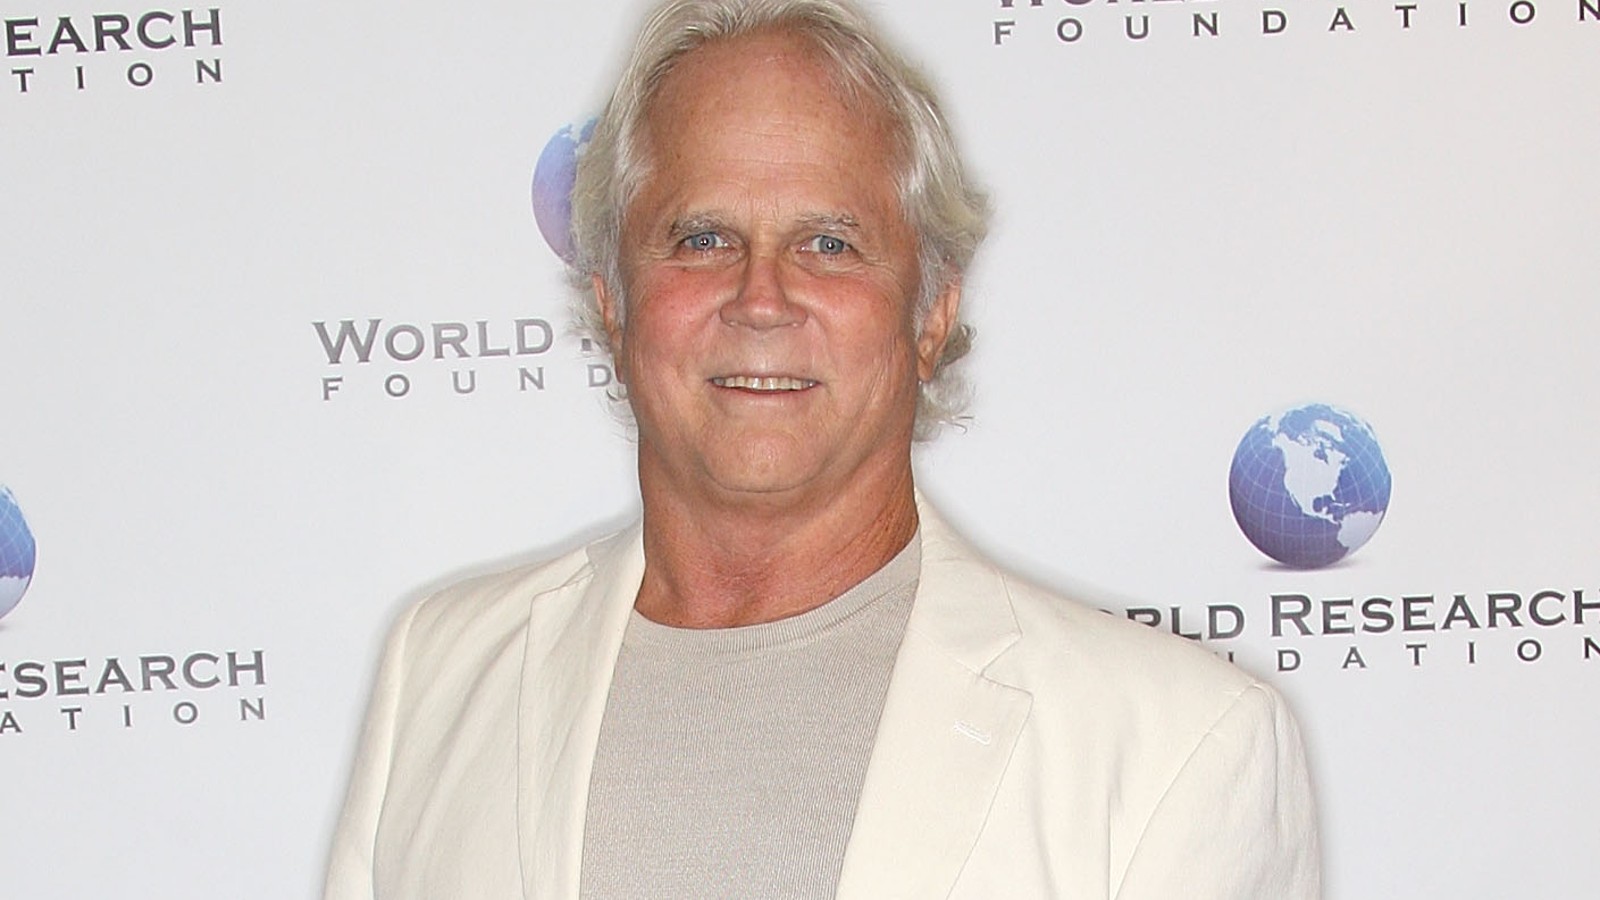 Tony Dow sports a white blazer and t-shirt at a red carpet event.